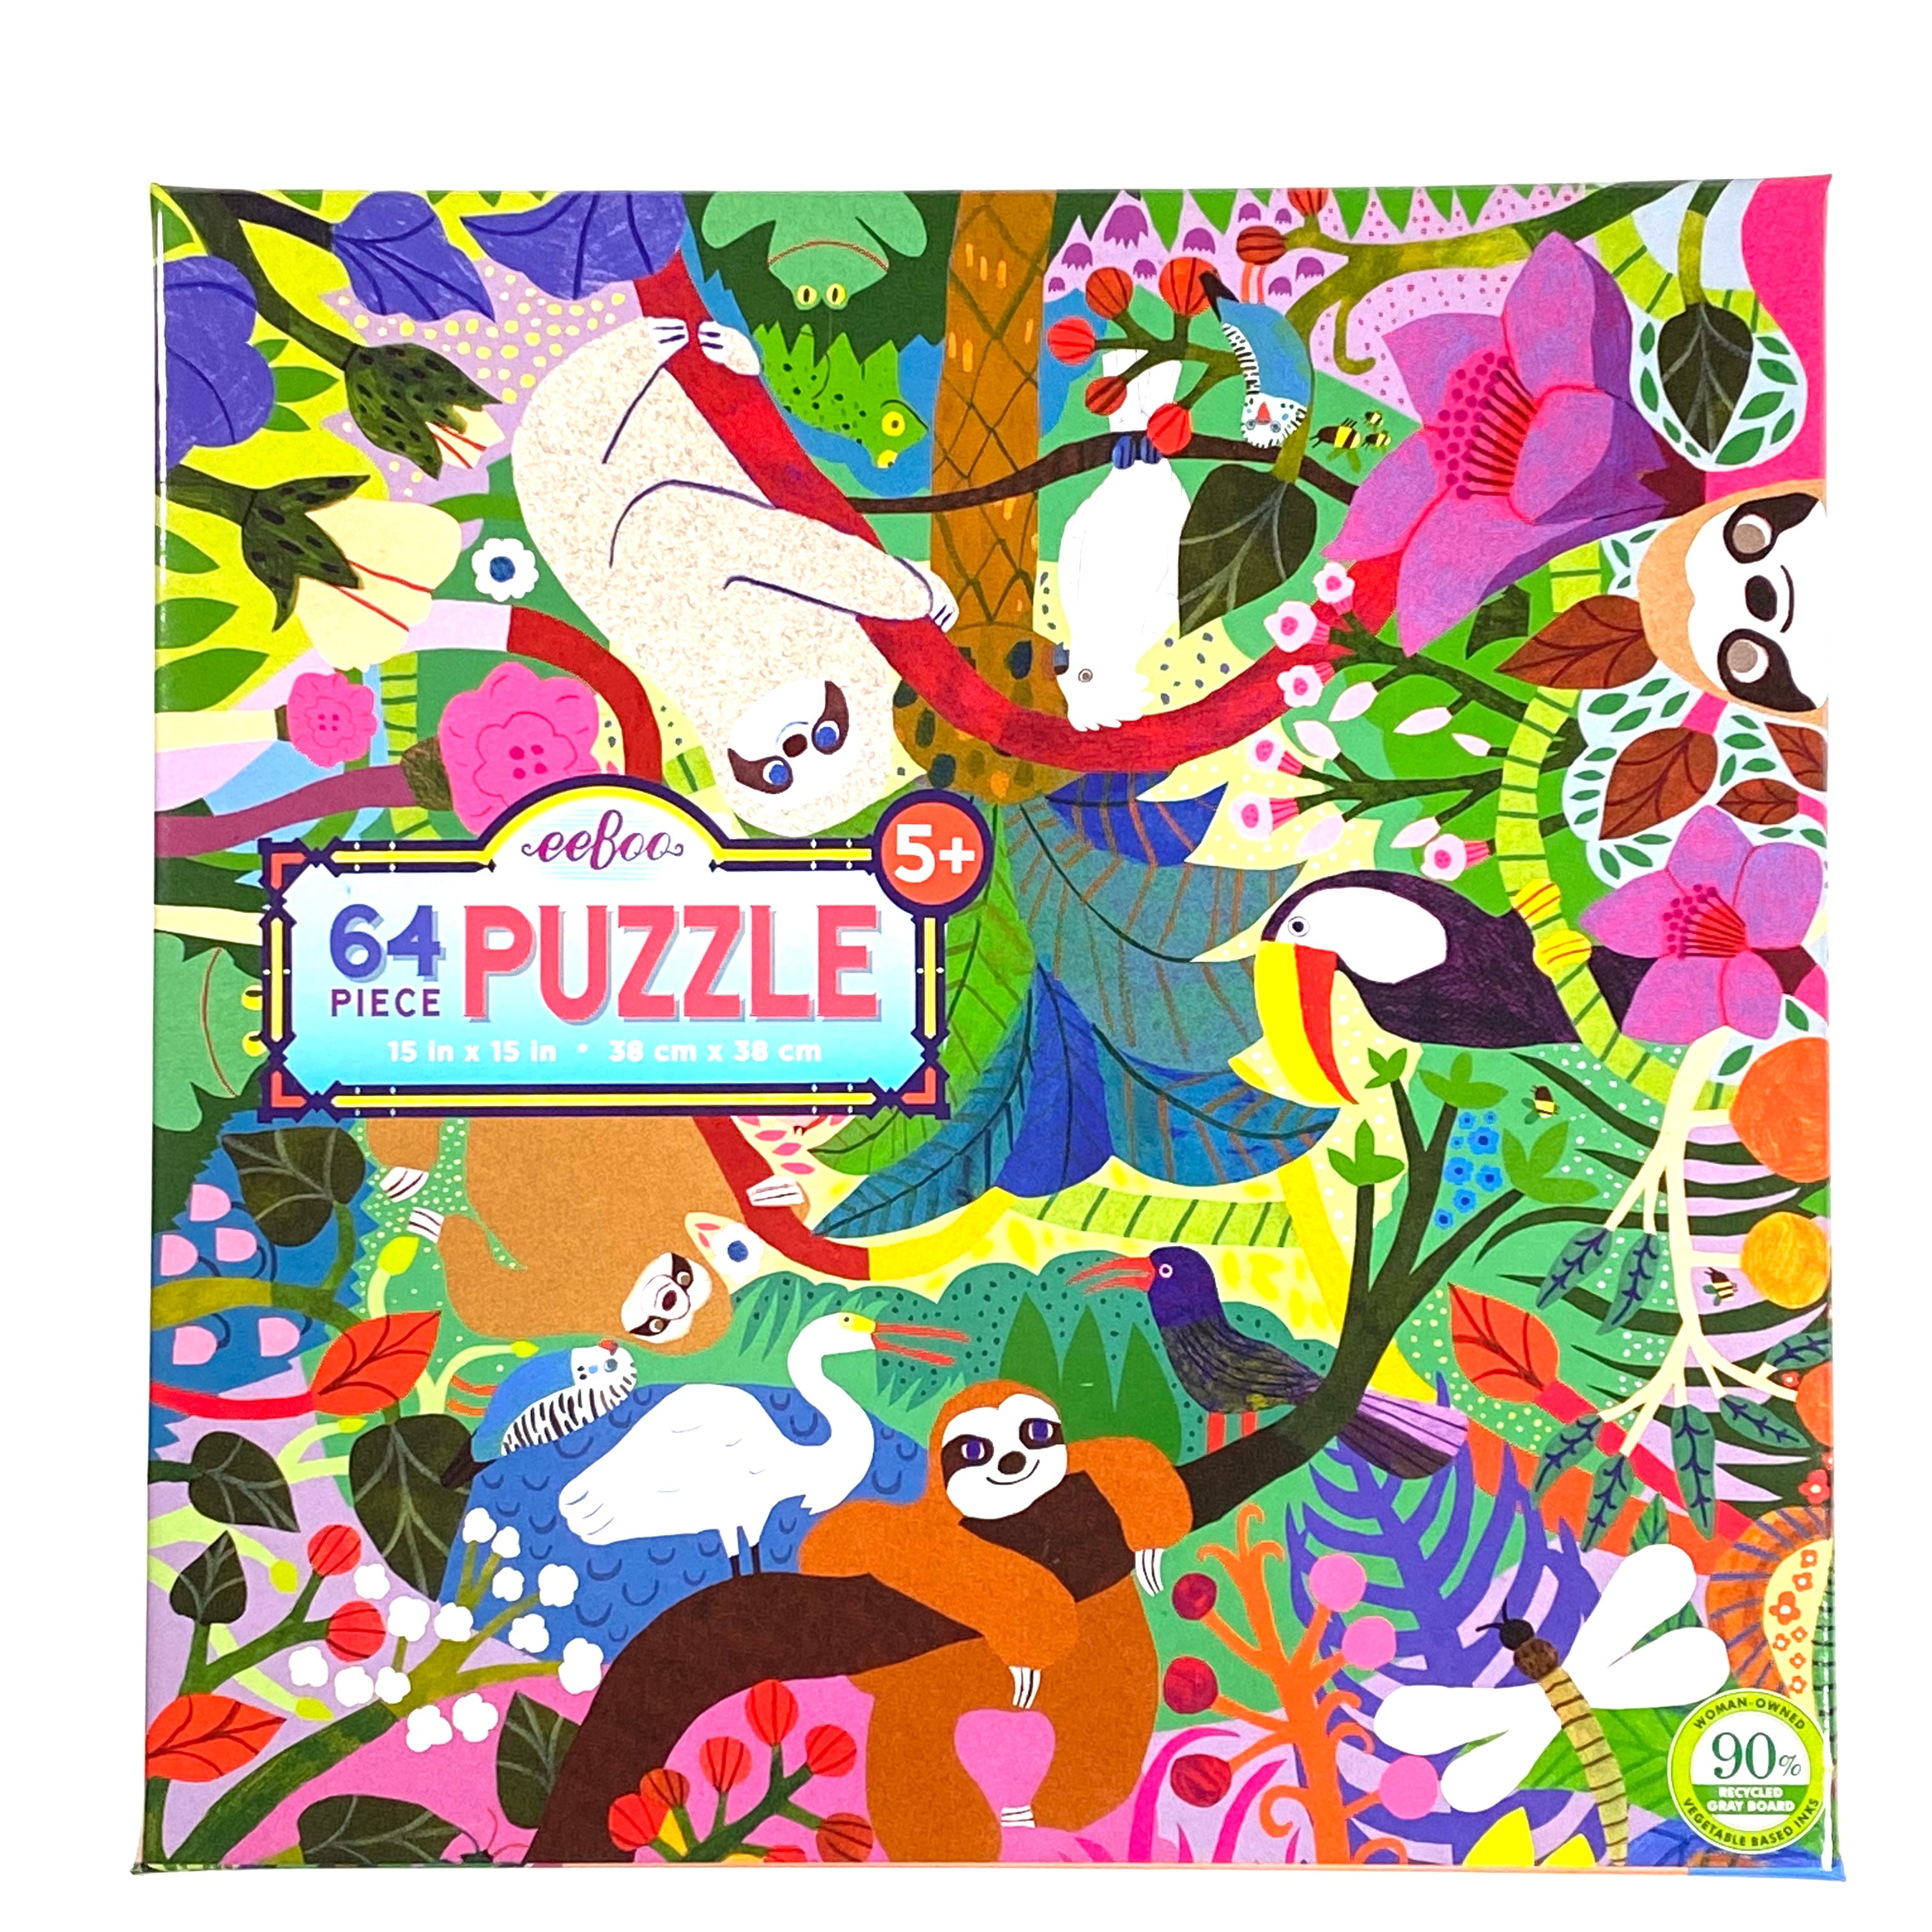 Sloths at Play 64 piece puzzle    